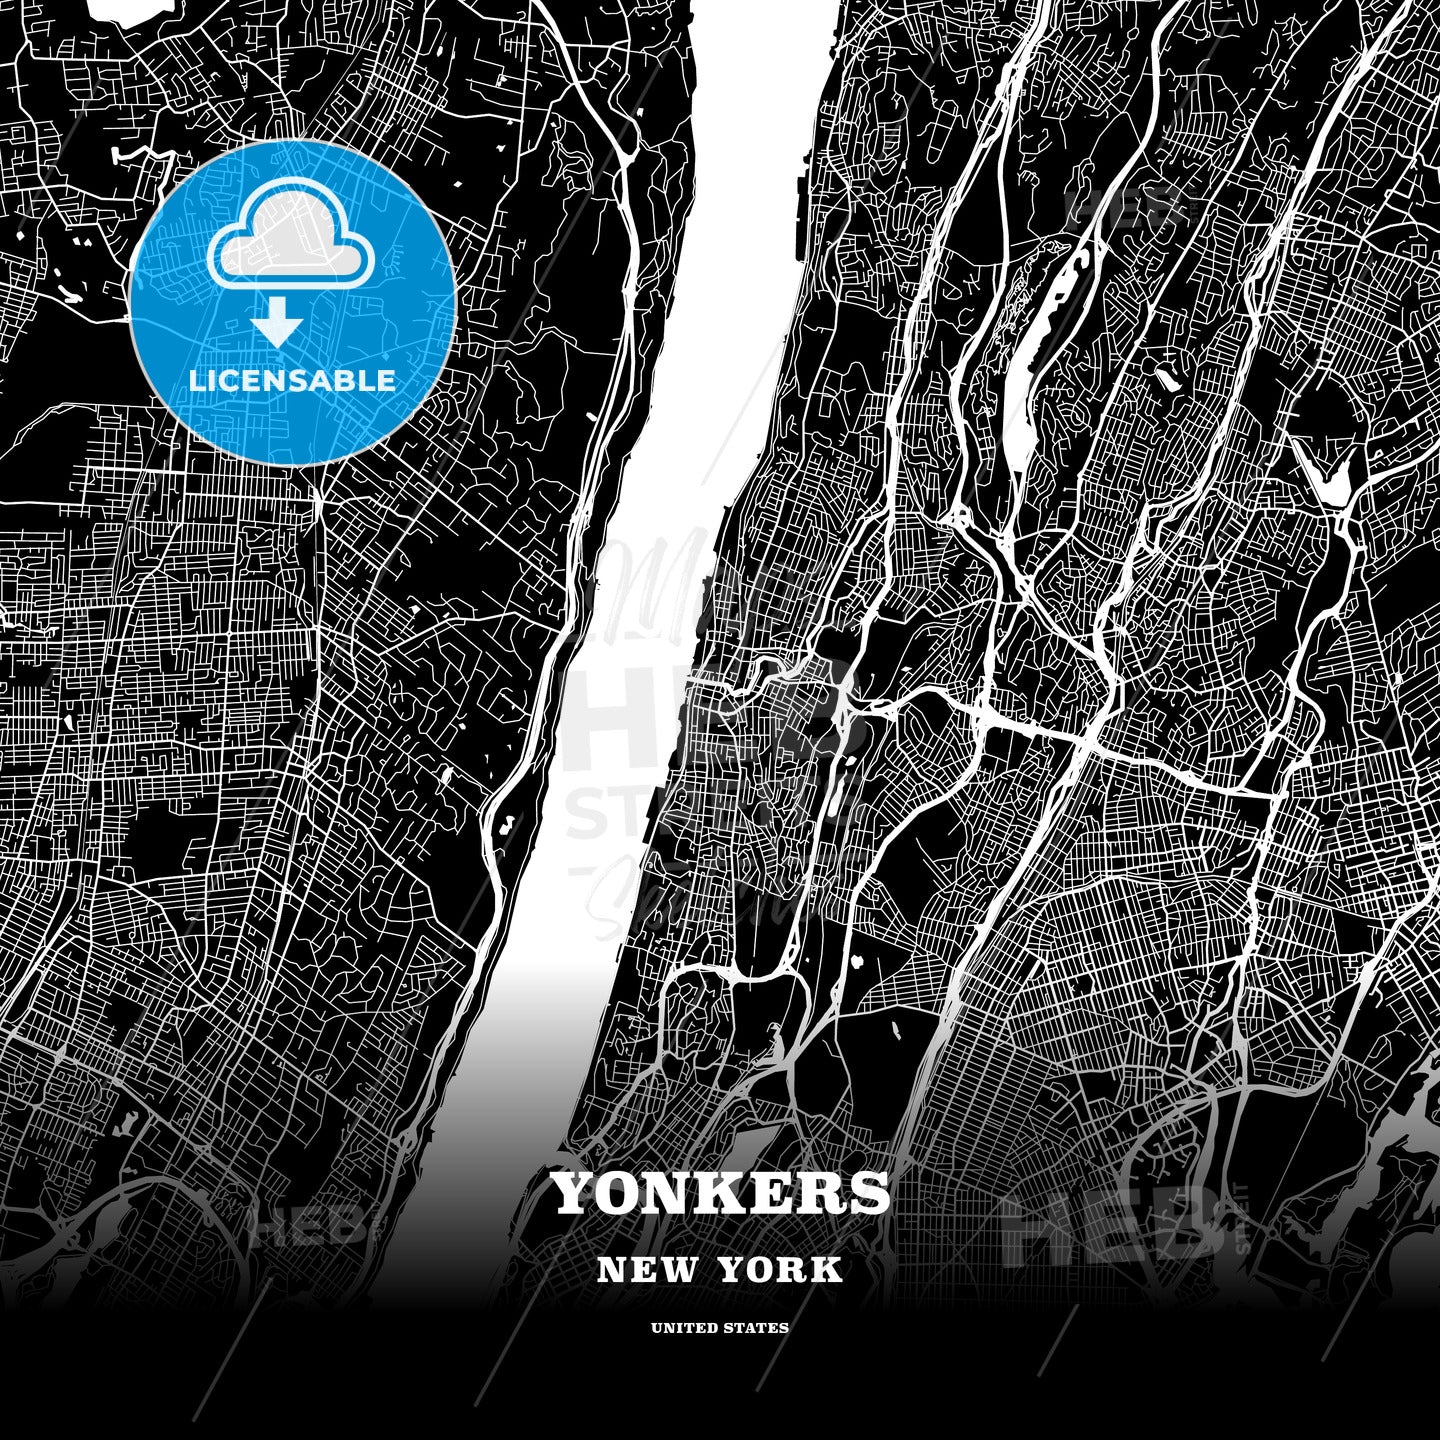 Yonkers, New York, USA map